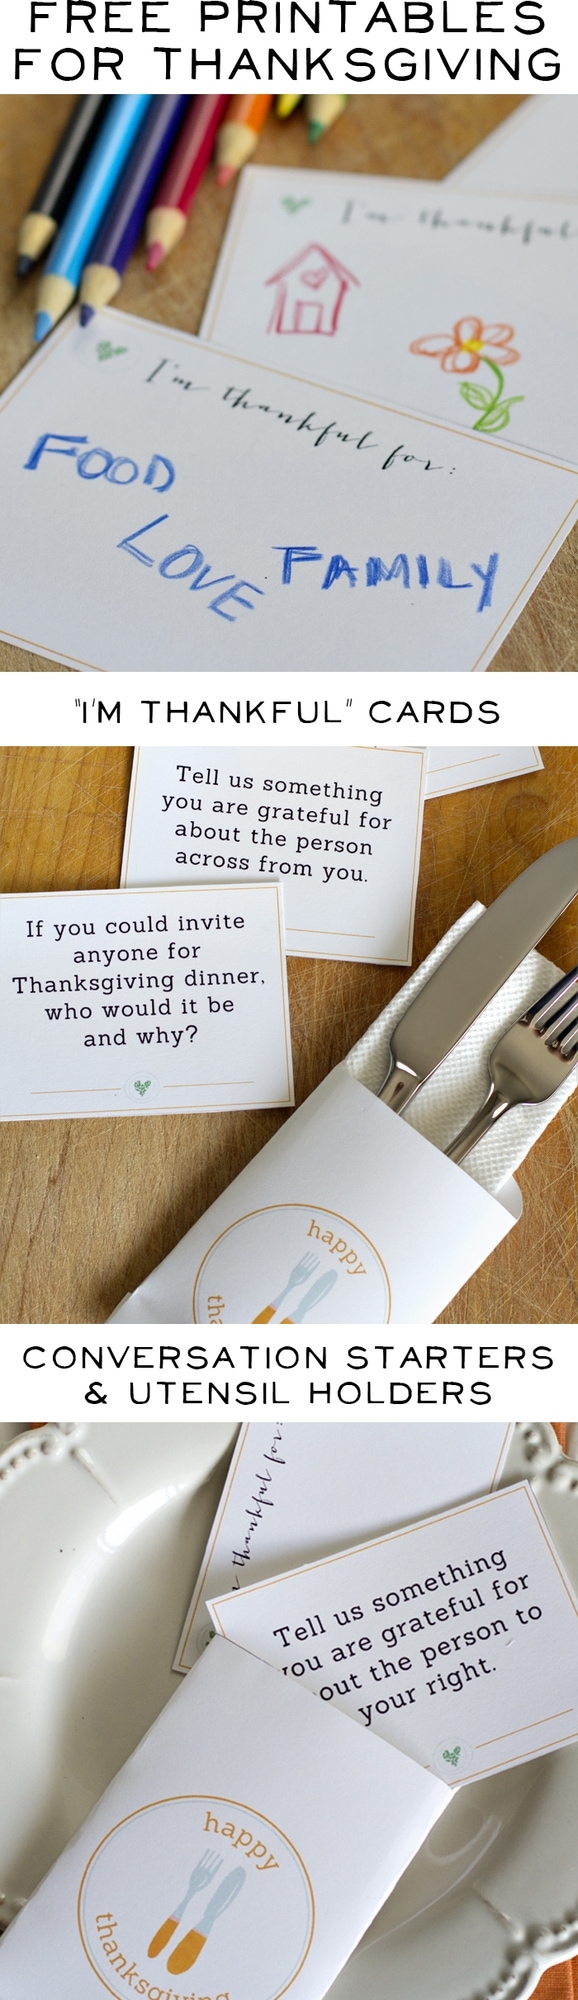 Free Printables for your Thanksgiving Table - Thankful cards, Conversation Starters, Utensil holders